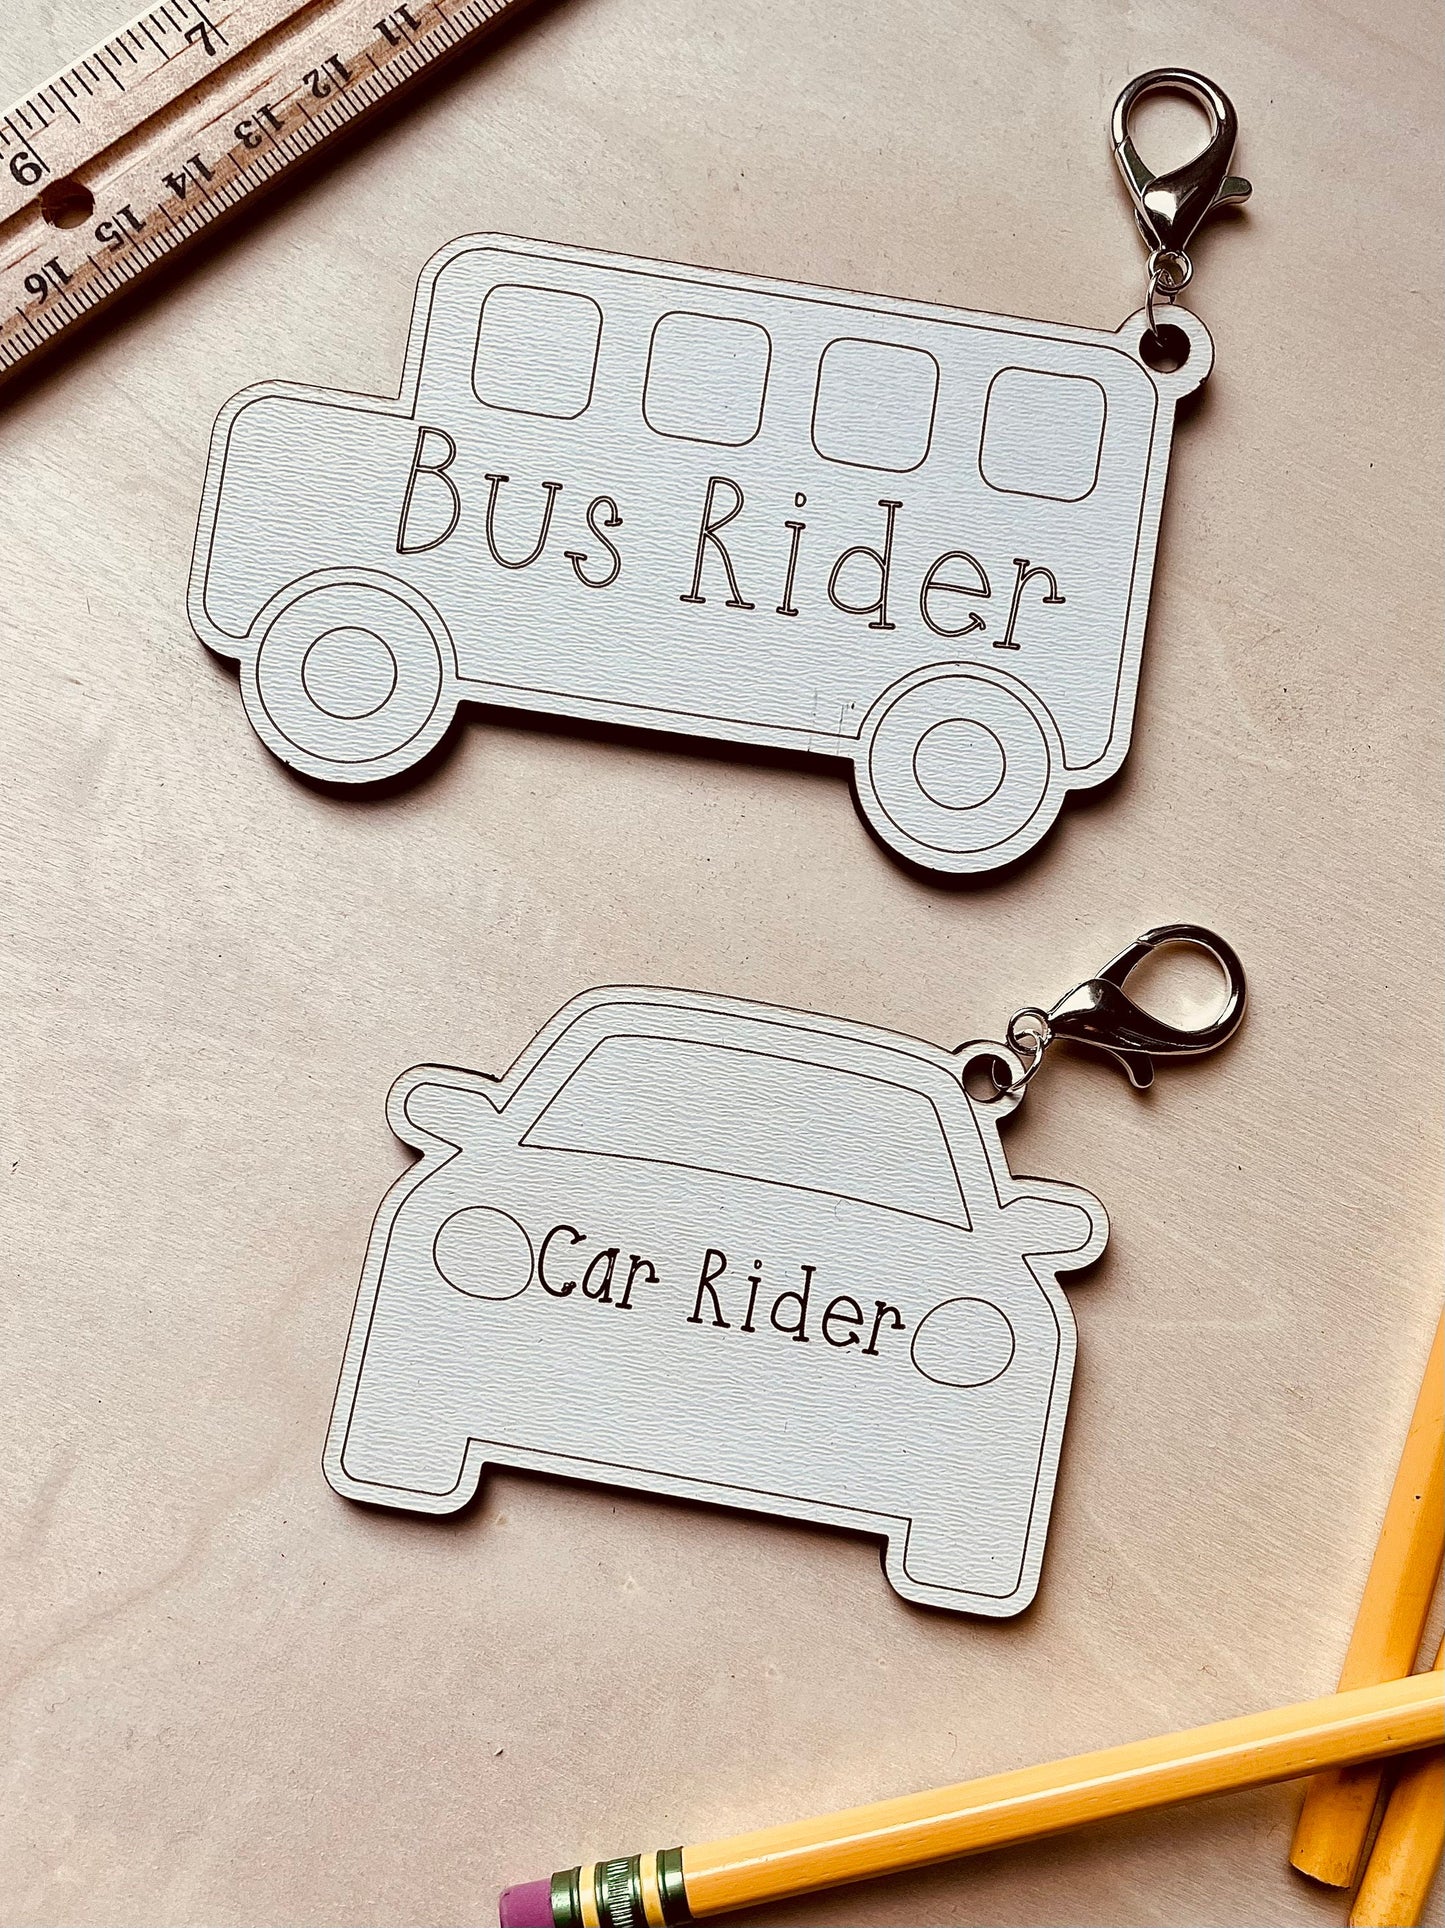 School backpack tag, bus rider, car rider, backpack, school label